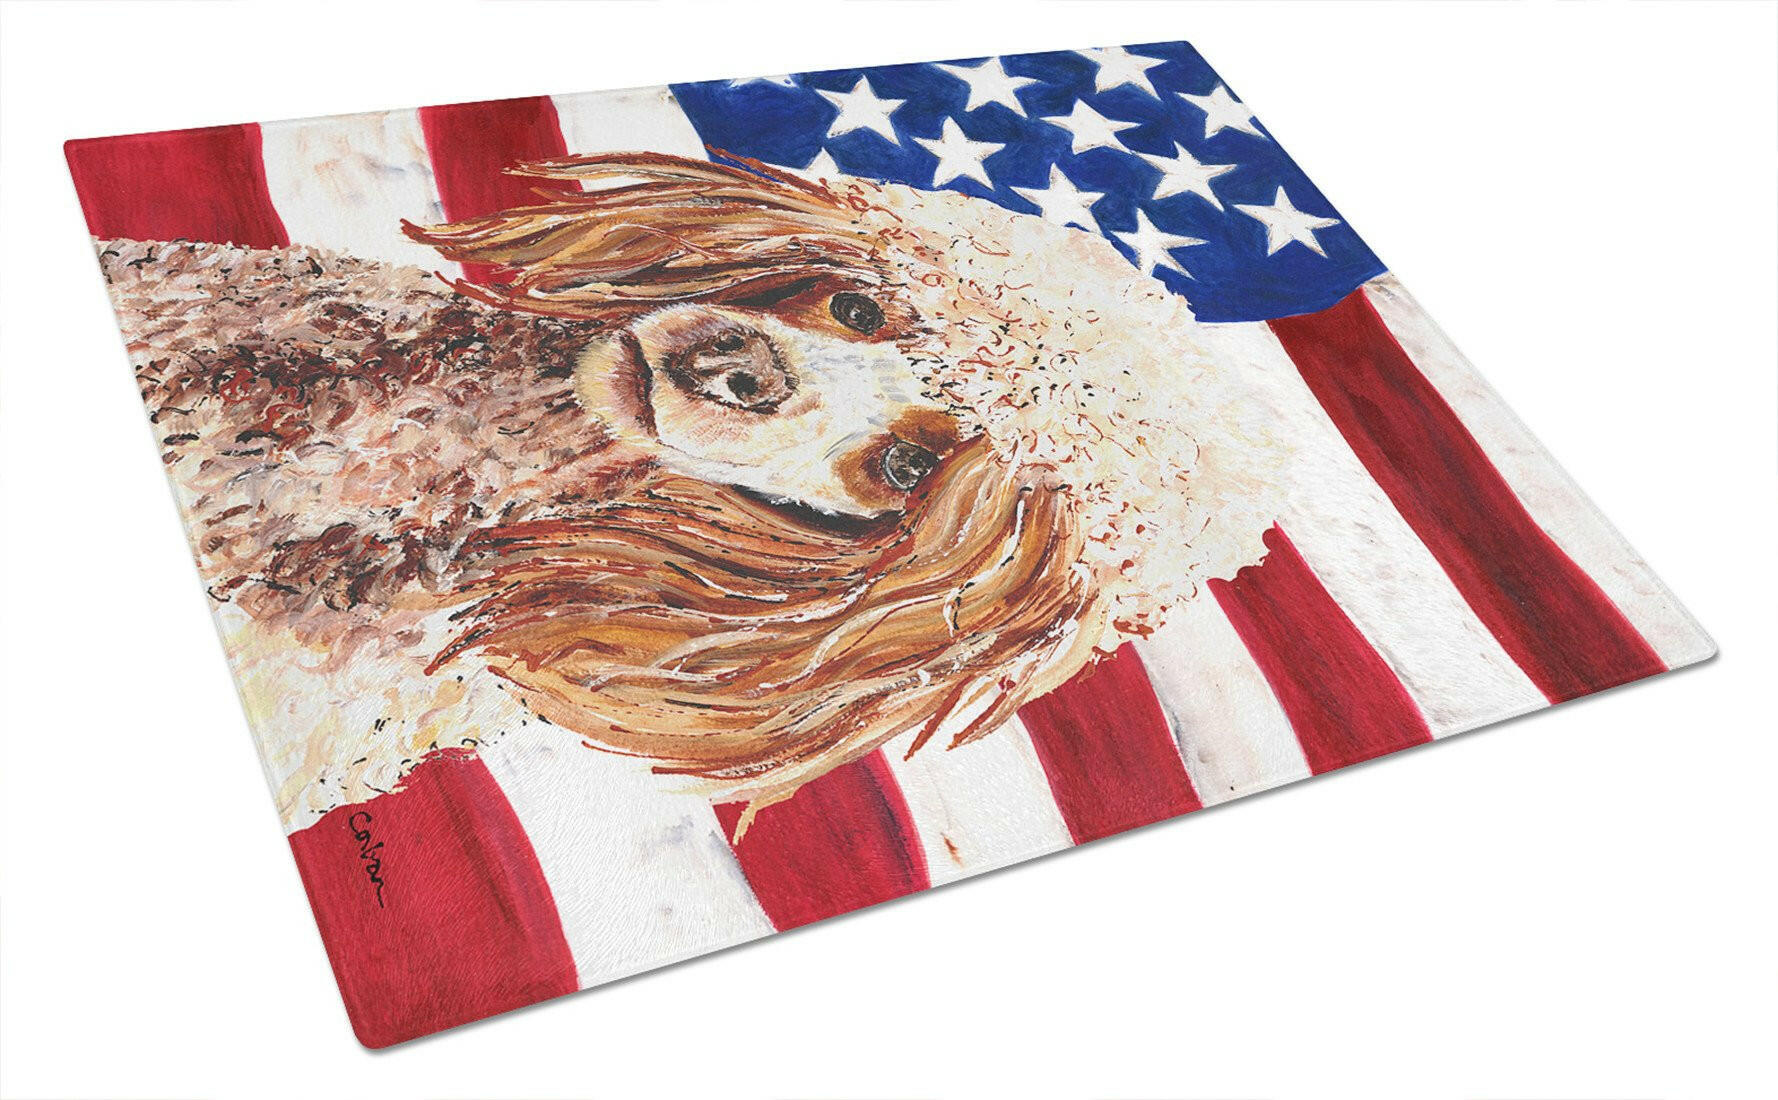 Red Miniature Poodle with American Flag USA Glass Cutting Board Large Size SC9627LCB by Caroline's Treasures